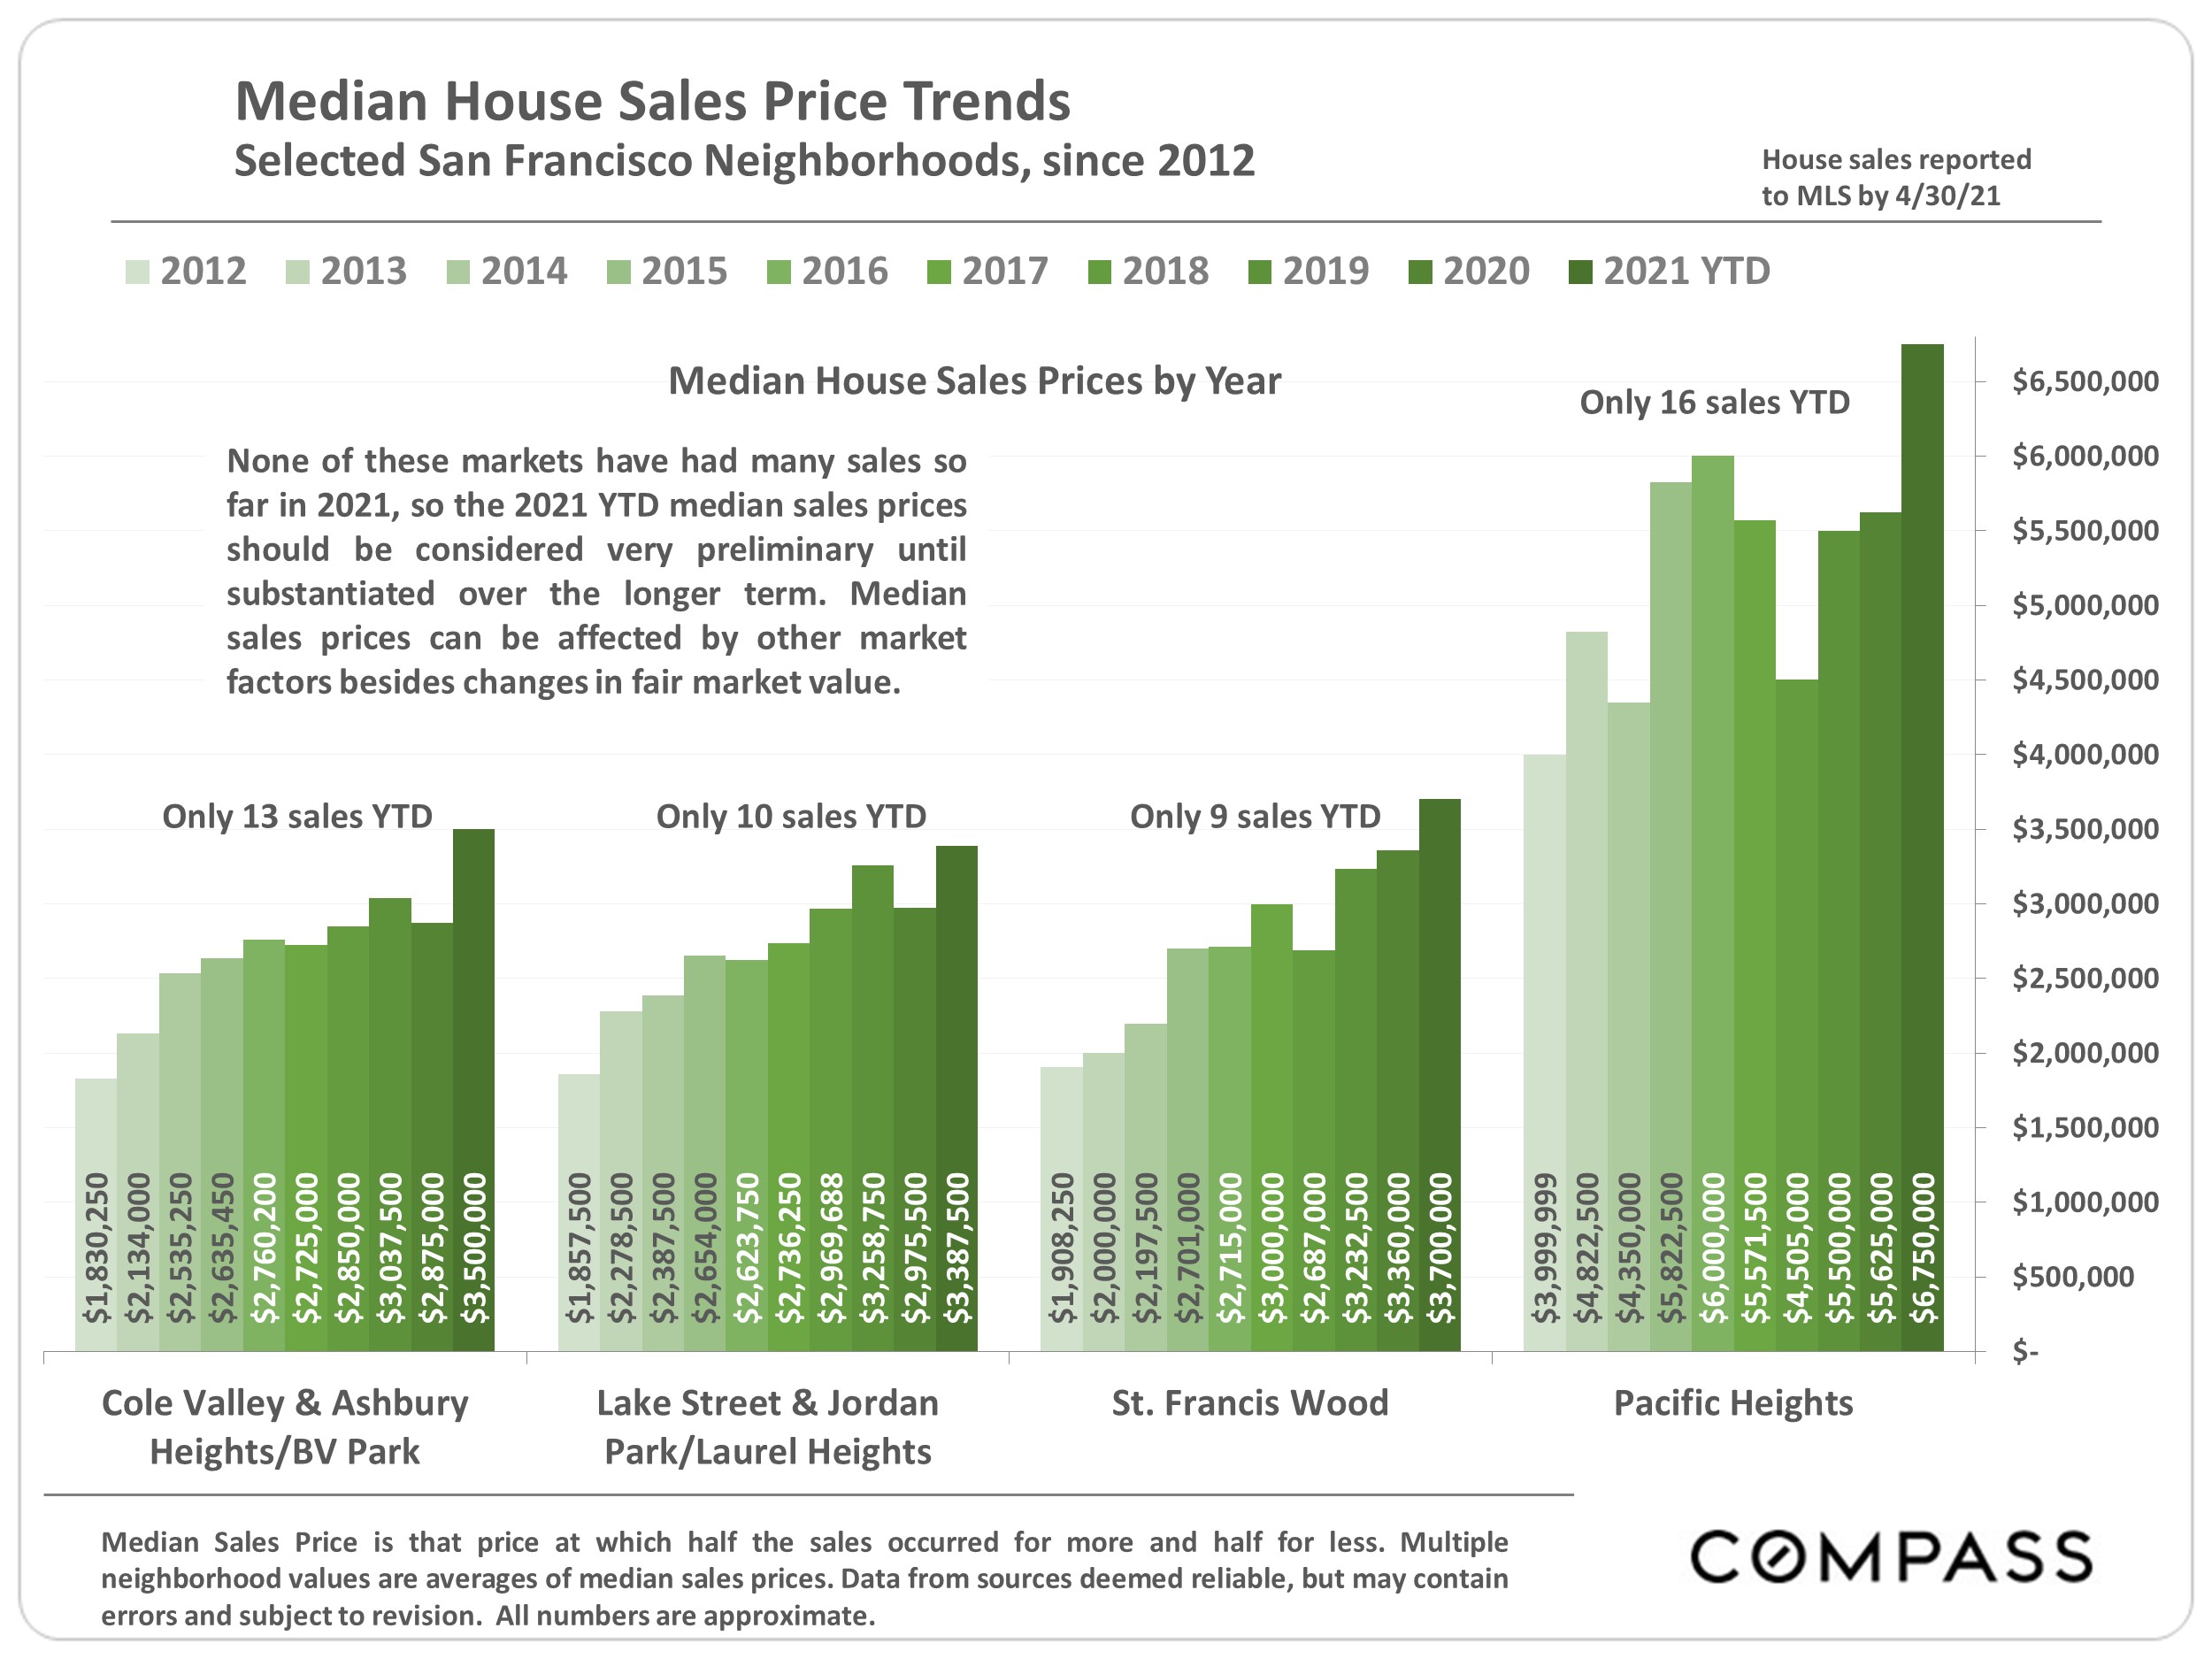 Chart showing the Median House Sales Price Trends, Selected San Francisco Neighborhoods, since 2012